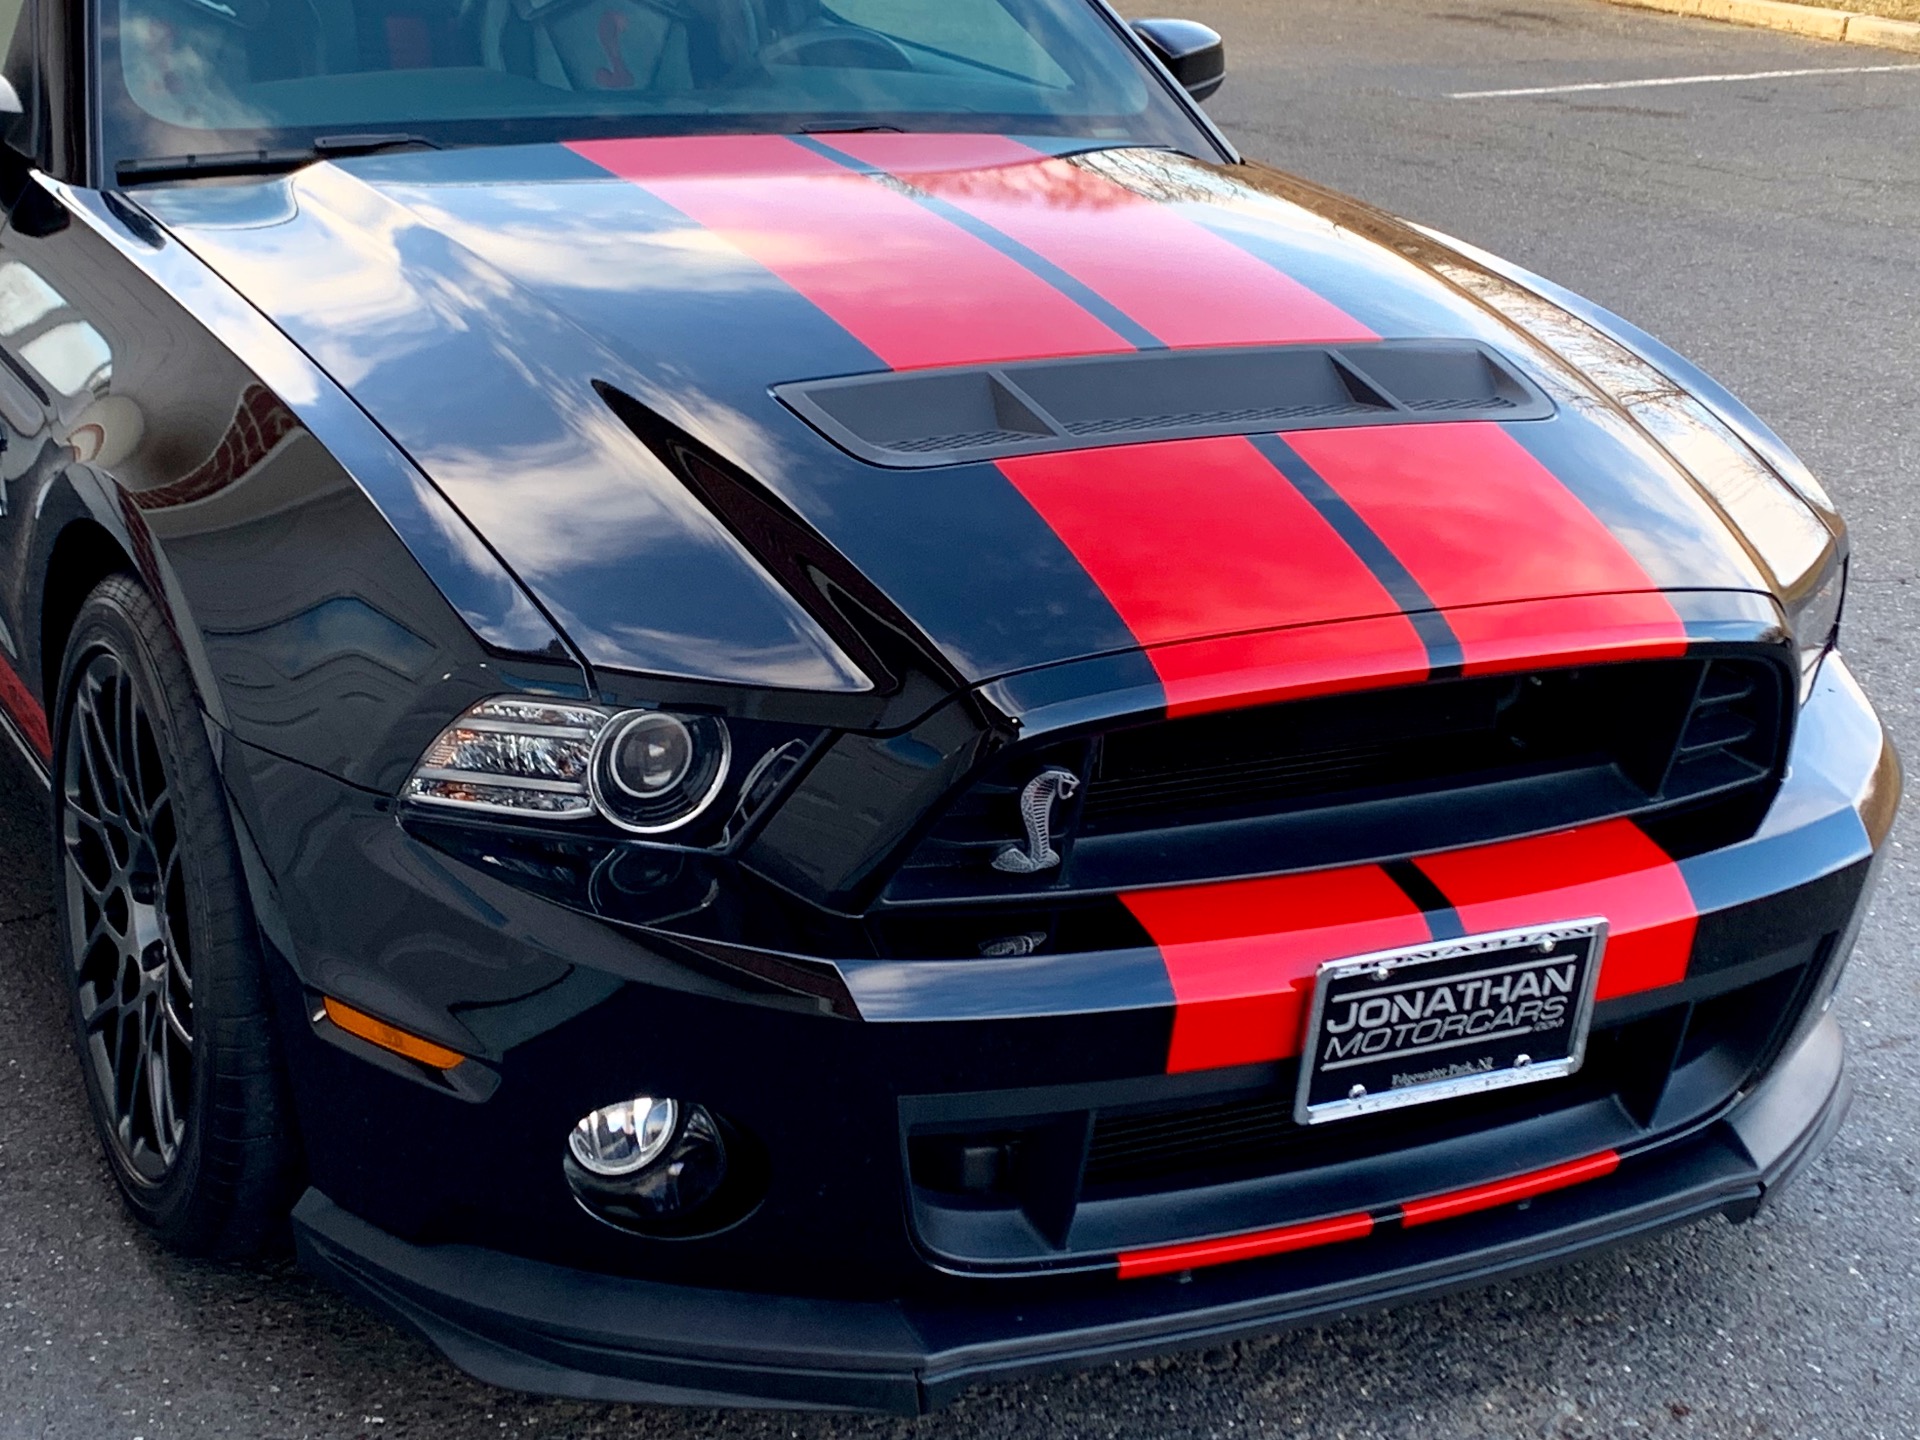 2013 Ford Shelby Gt500 Svt Performance Stock 258496 For Sale Near